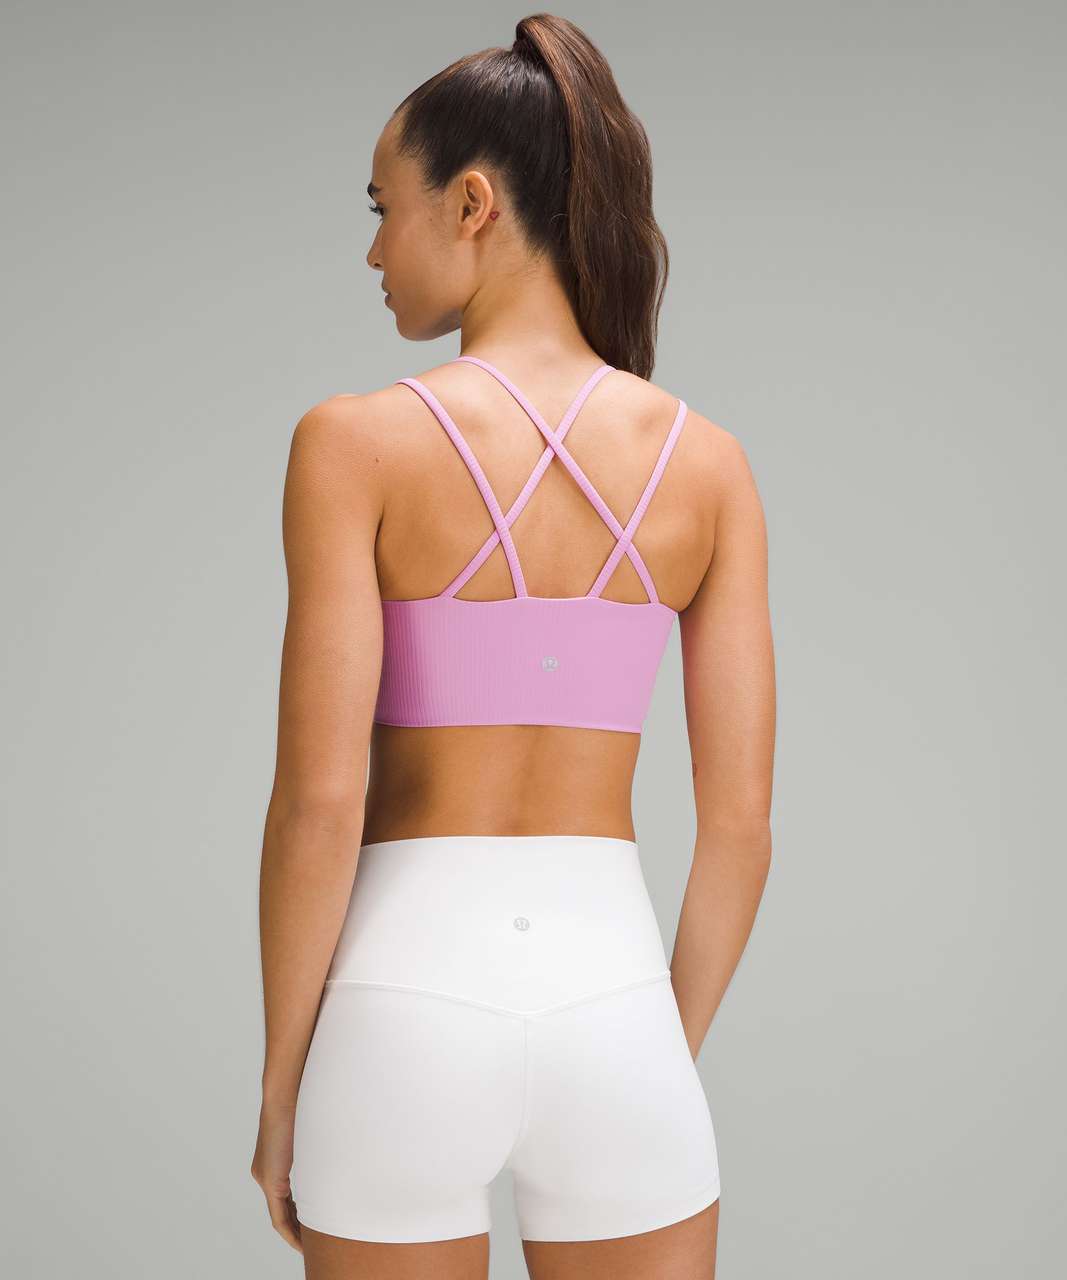 Lululemon Like A Cloud Longline Bra Pink Size XS - $53 (11% Off Retail) New  With Tags - From Carissa